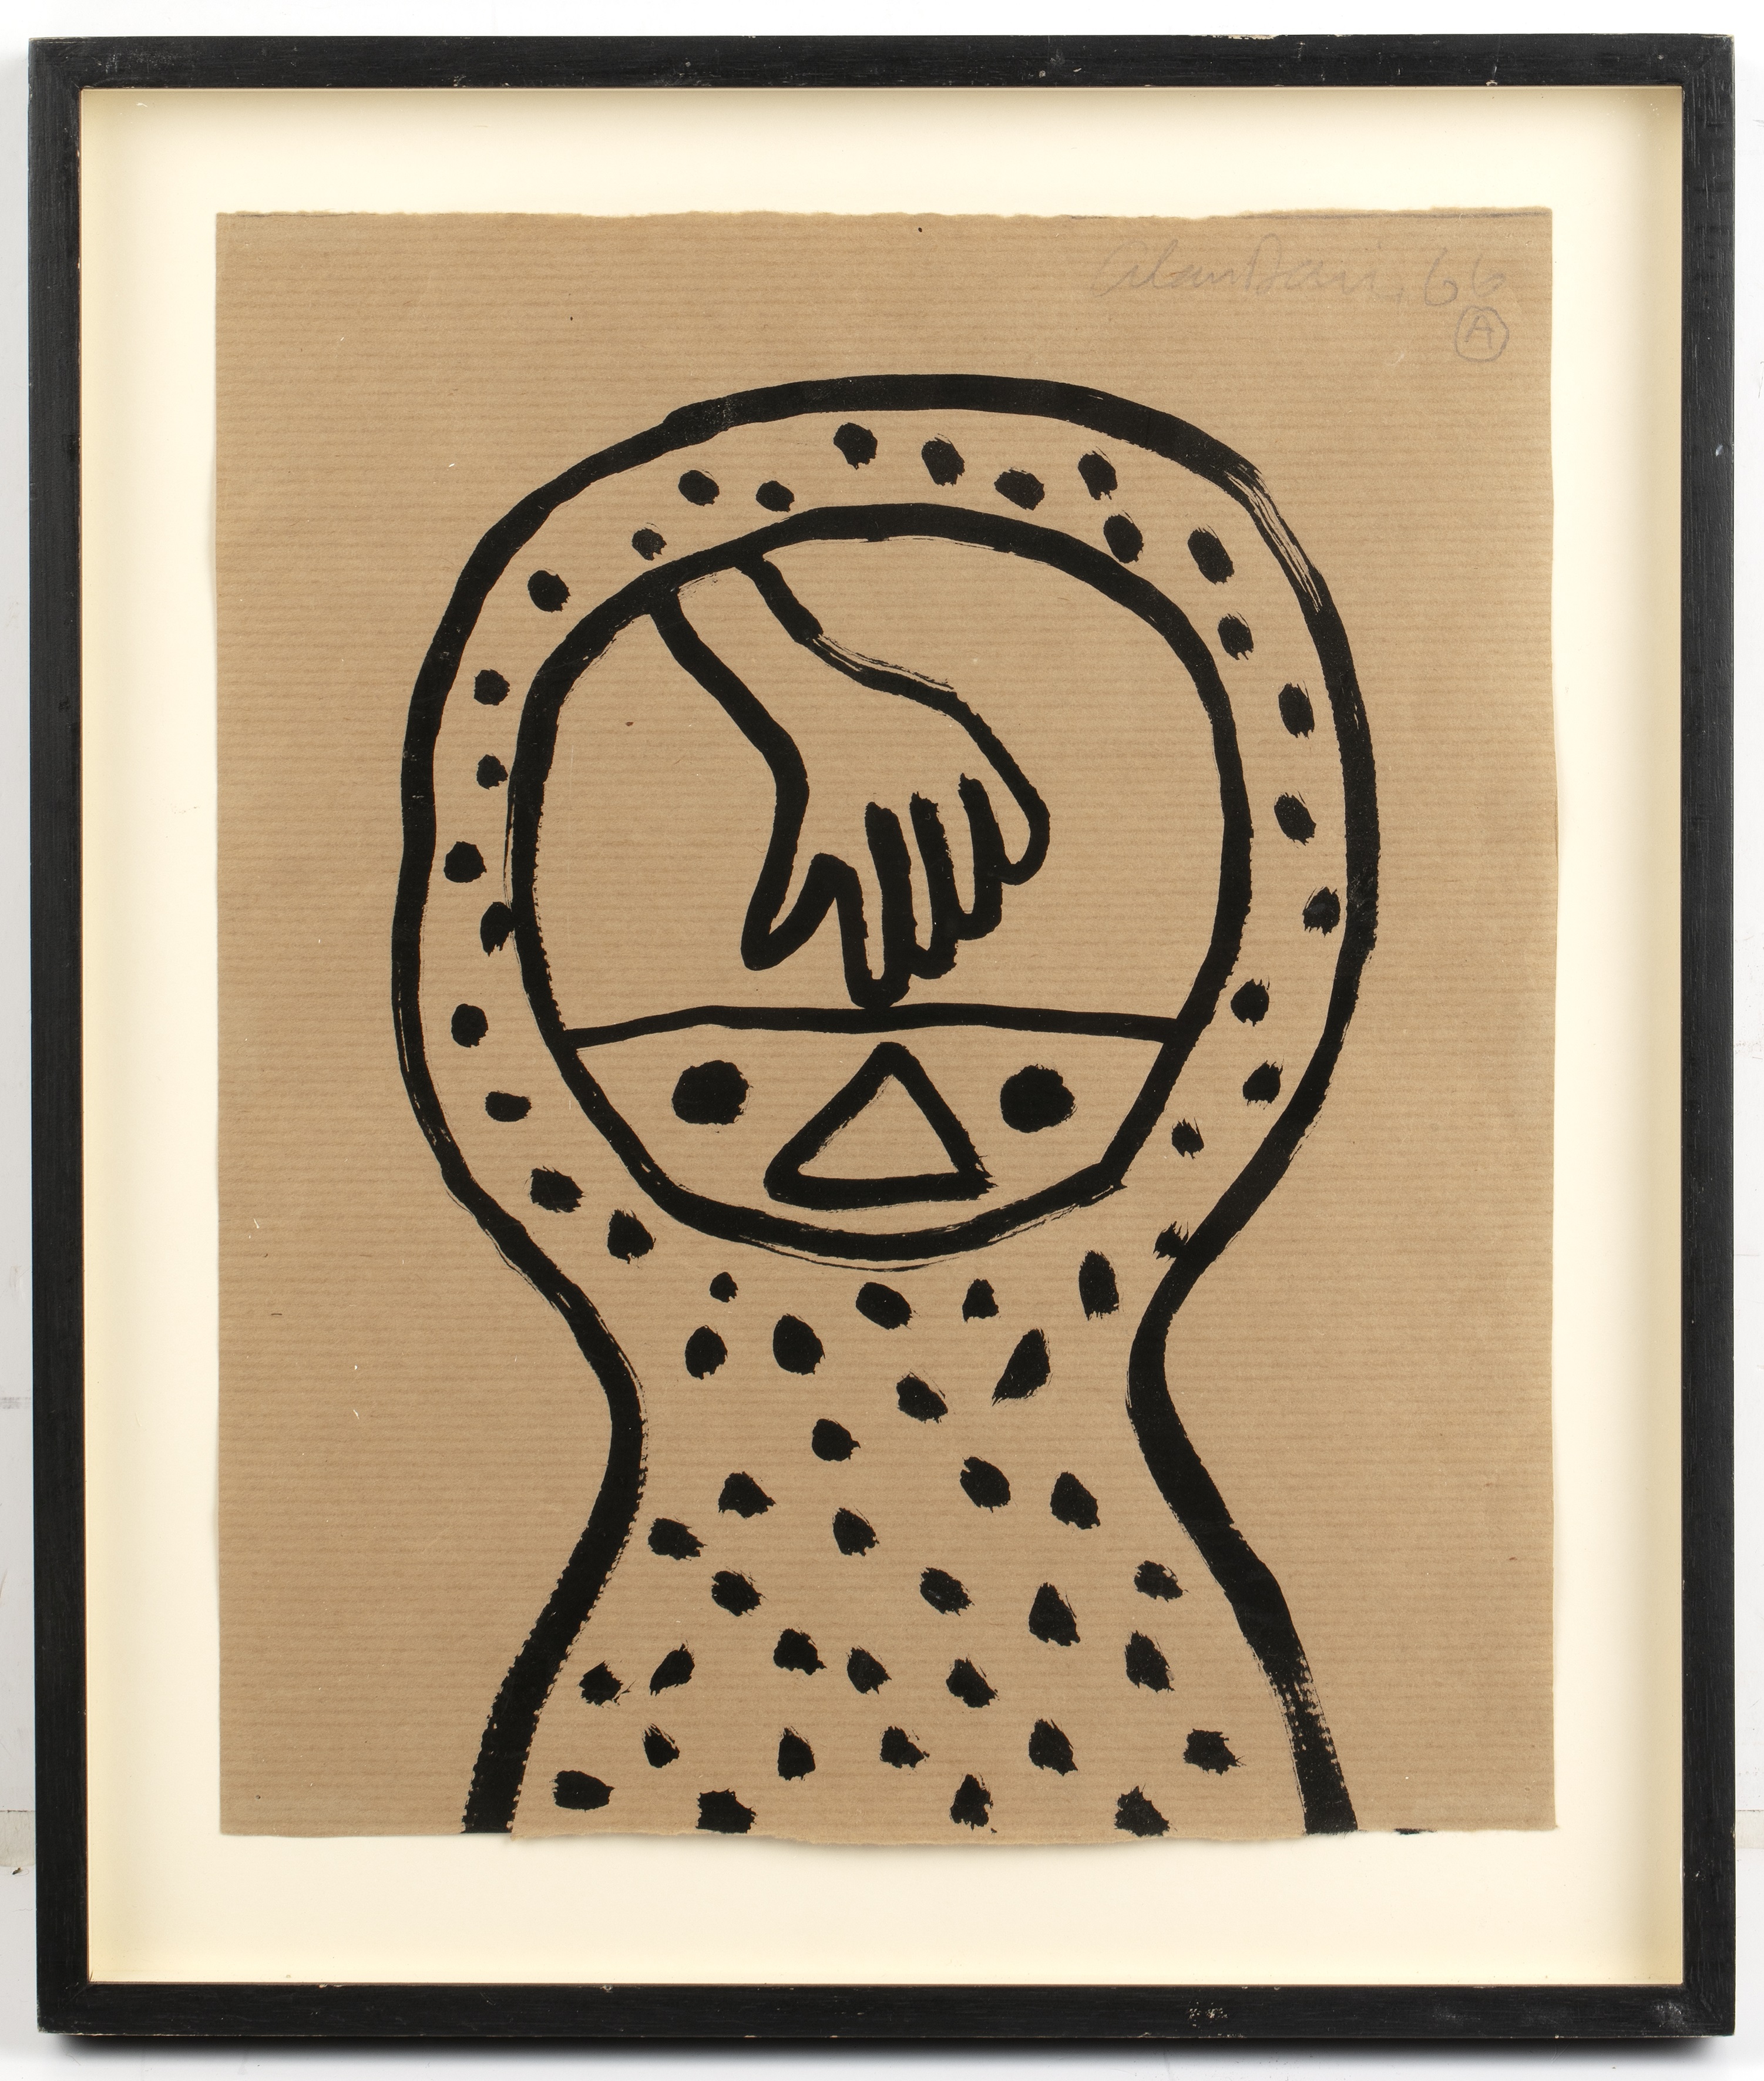 Alan Davie (1920-2014) Untitled, 1966 signed and dated (upper right) ink on paper 29 x 24cm. - Image 2 of 3